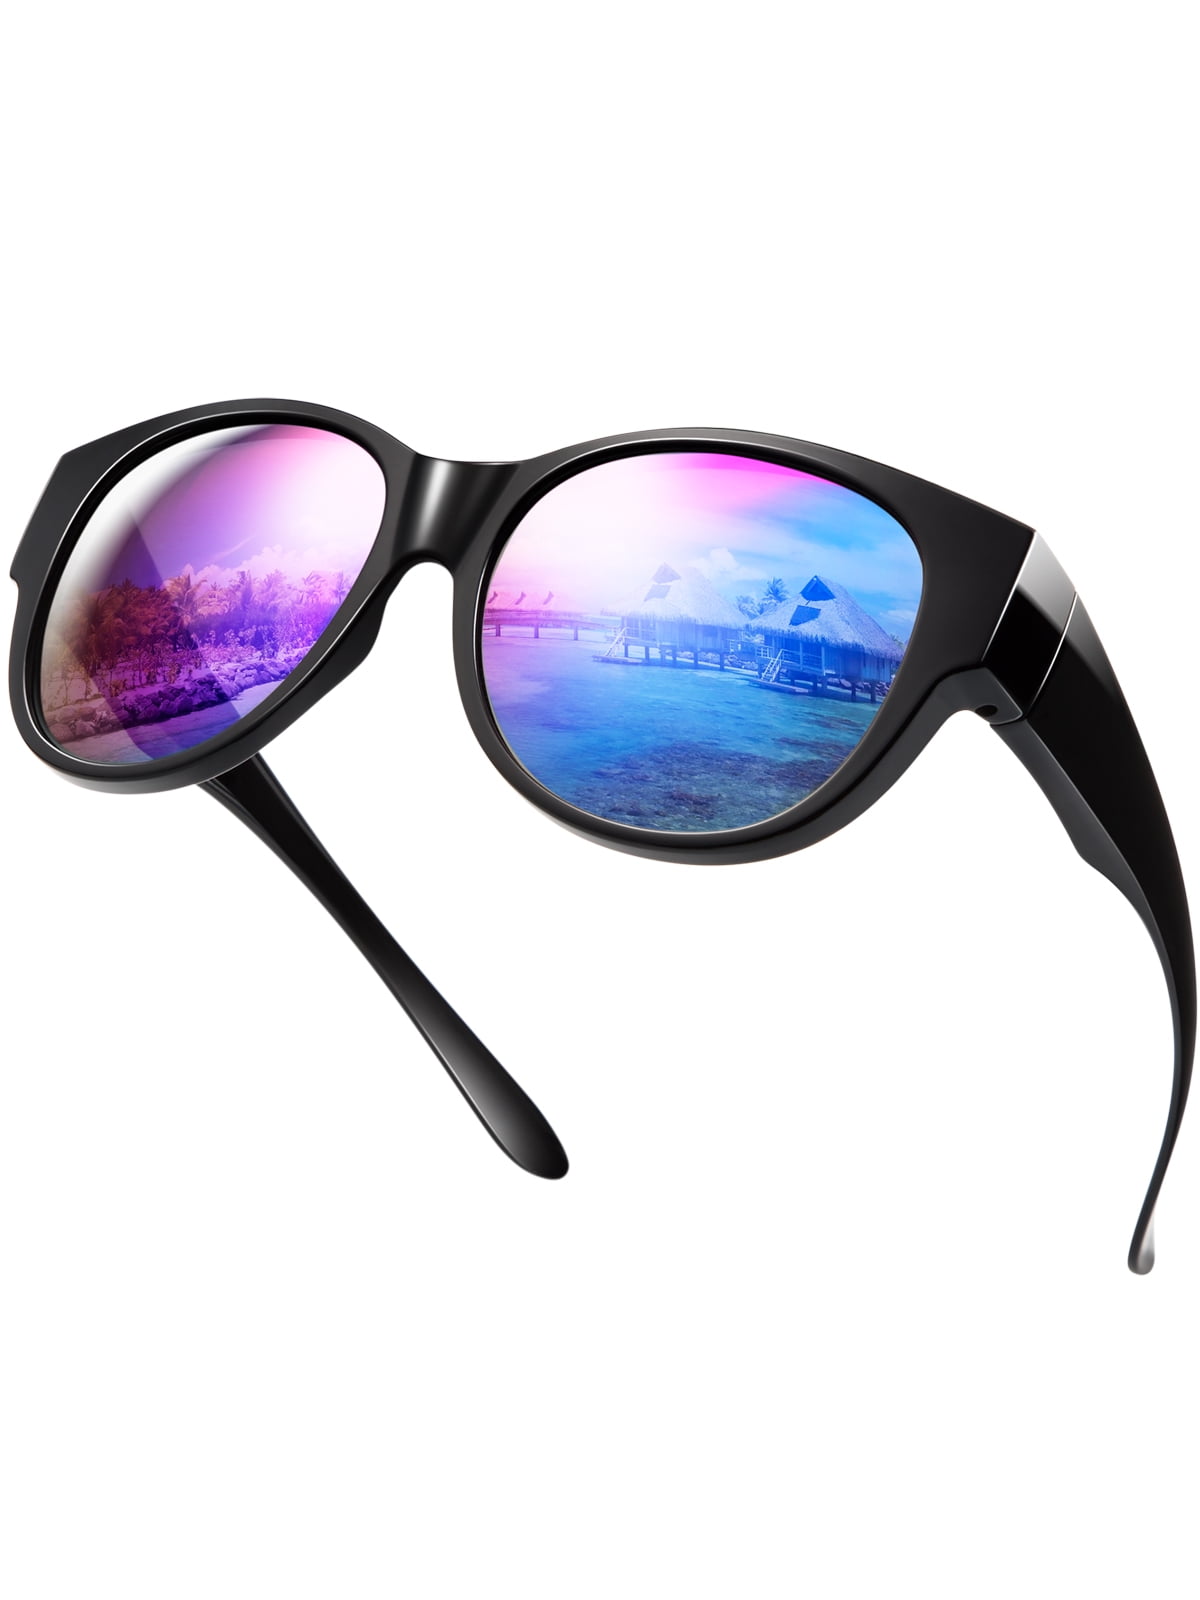 TINHAO Sunglasses Fit over Glasses Wear over glasses with Polarized ...